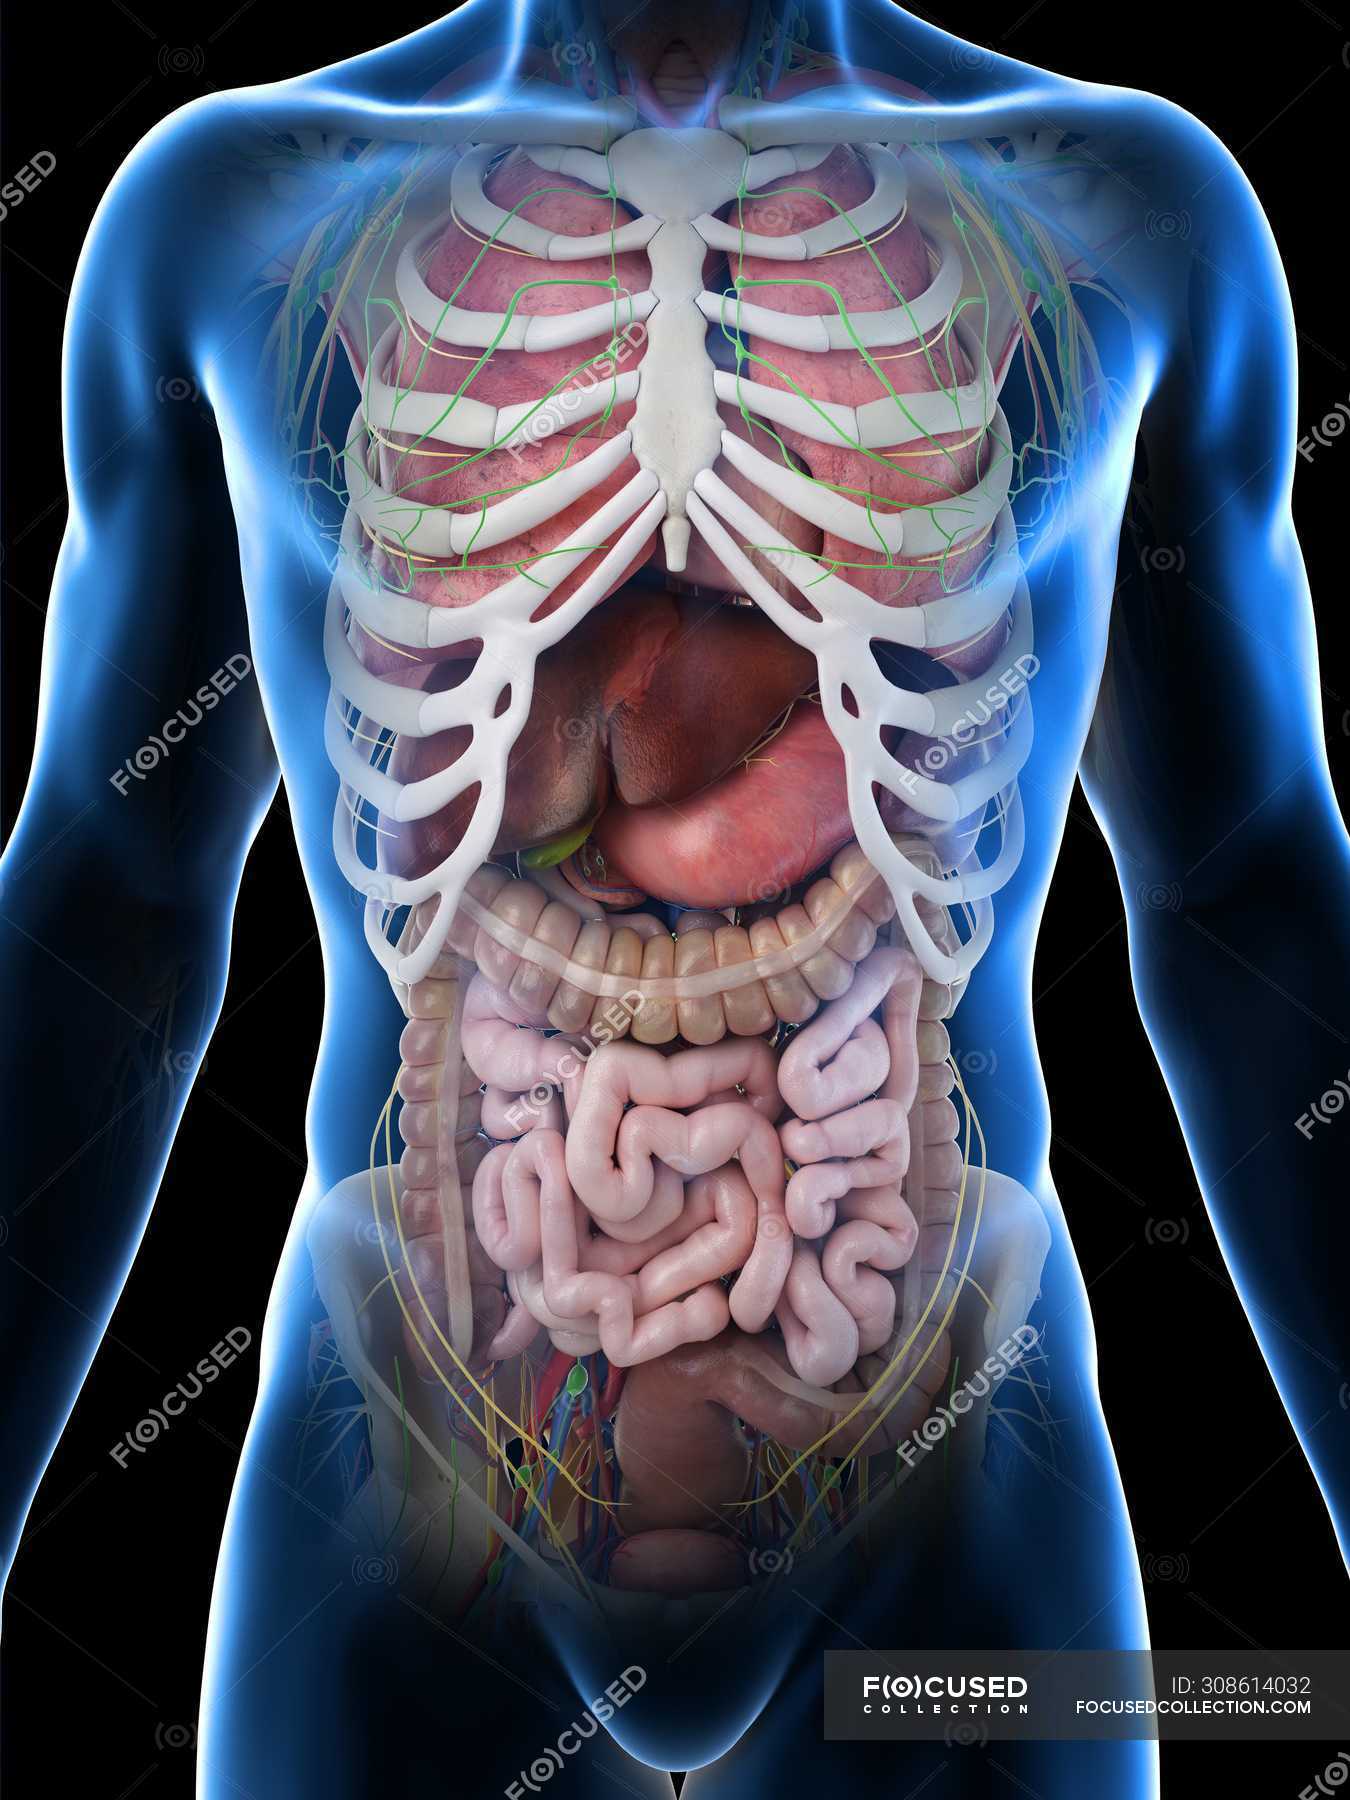 Image Showing Internal Organs In The Back / Realistic human body model